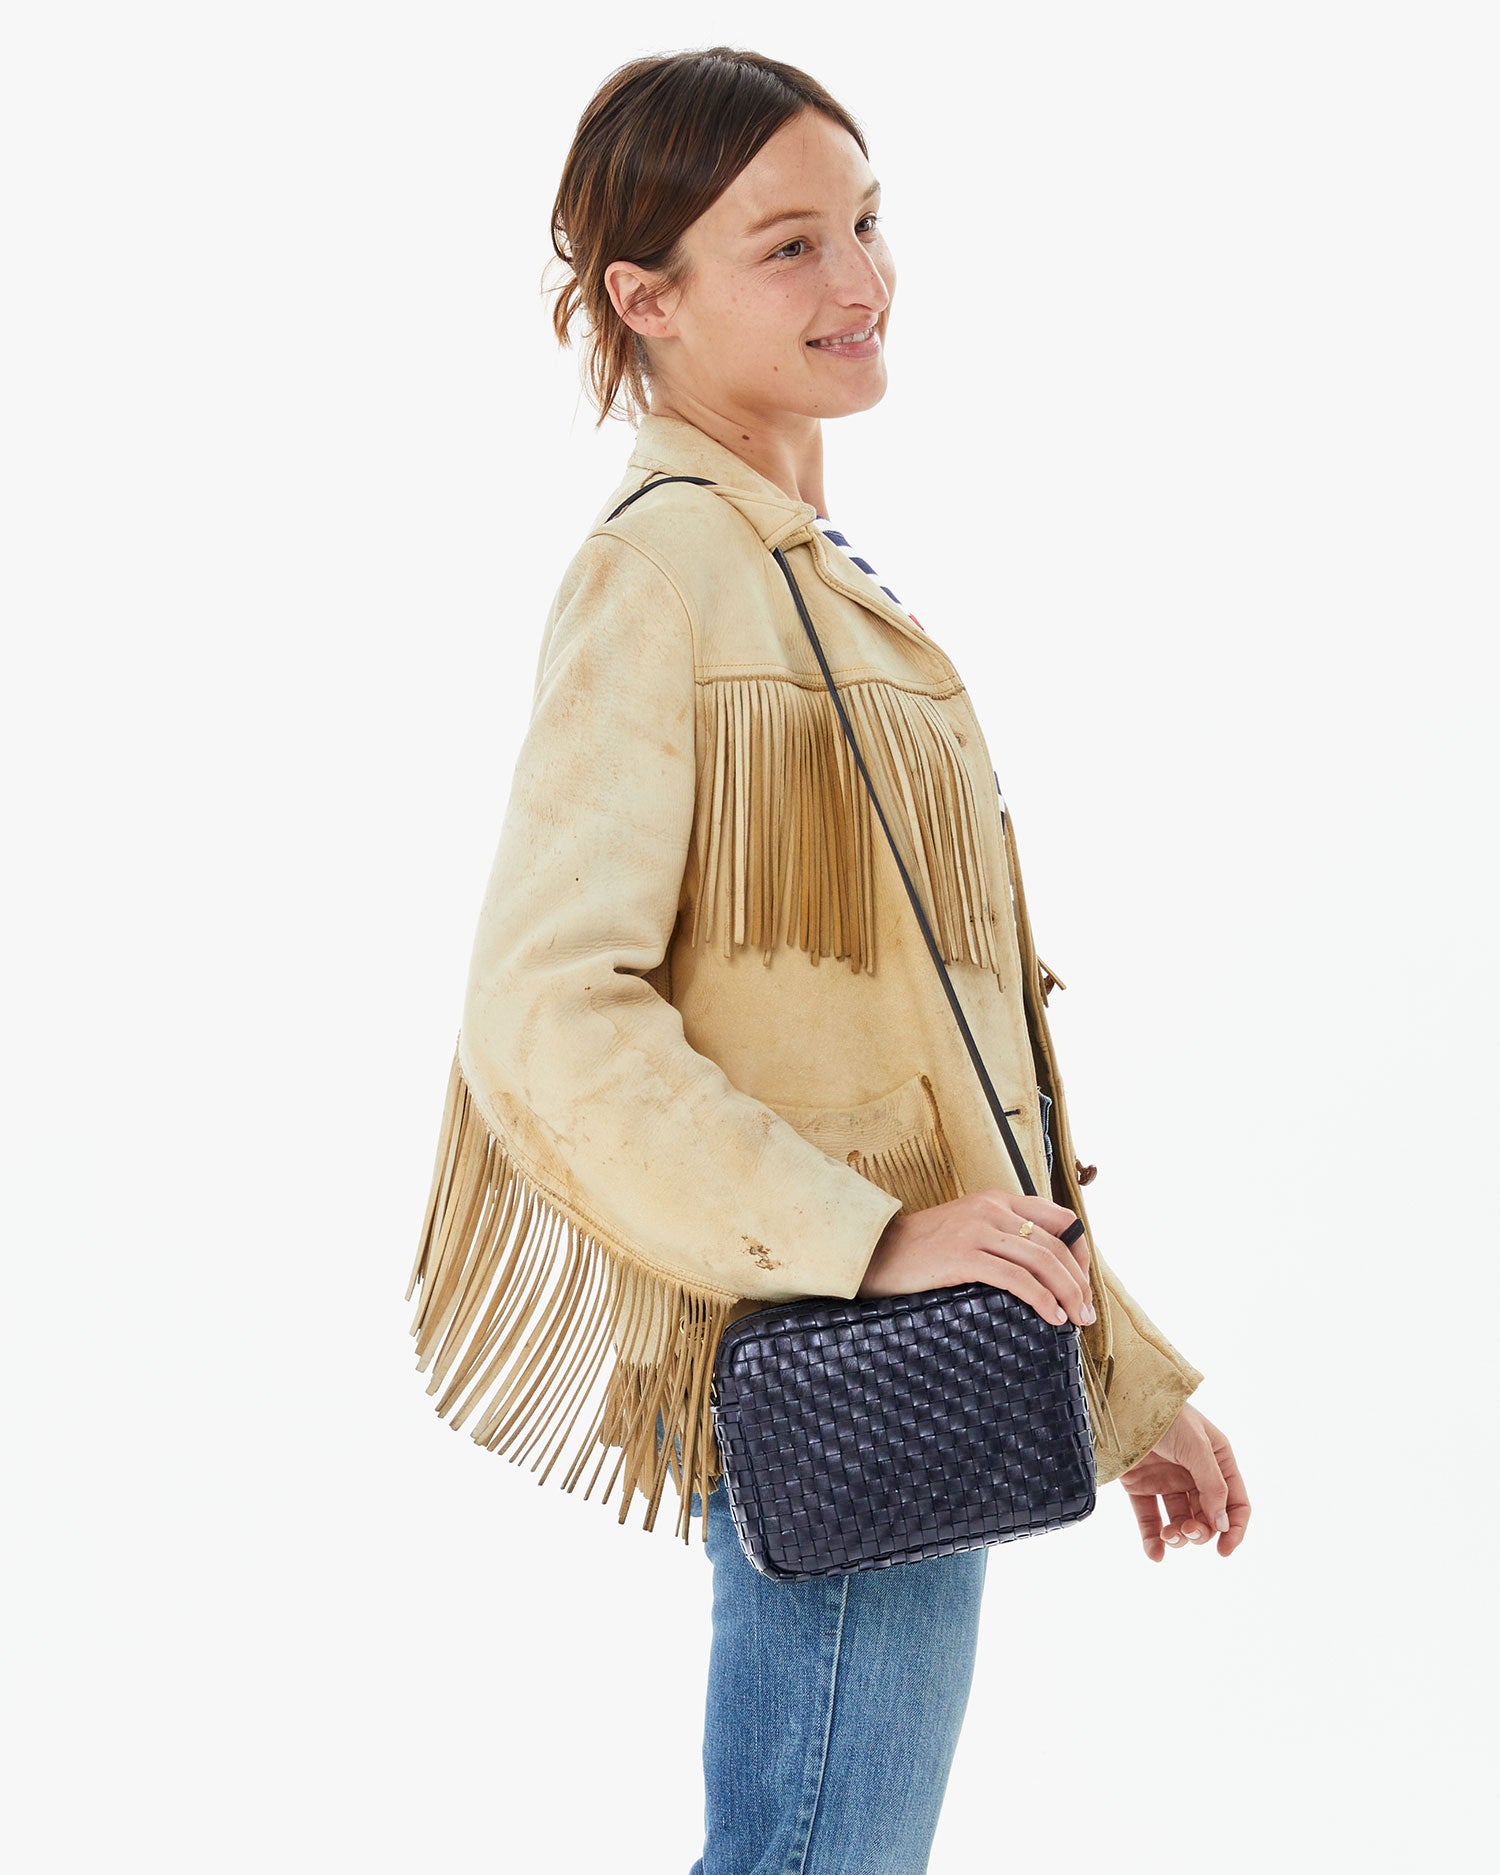 Zoe holding the Twilight Woven Checker Midi Sac on her shoulder in a fringe leather jacket